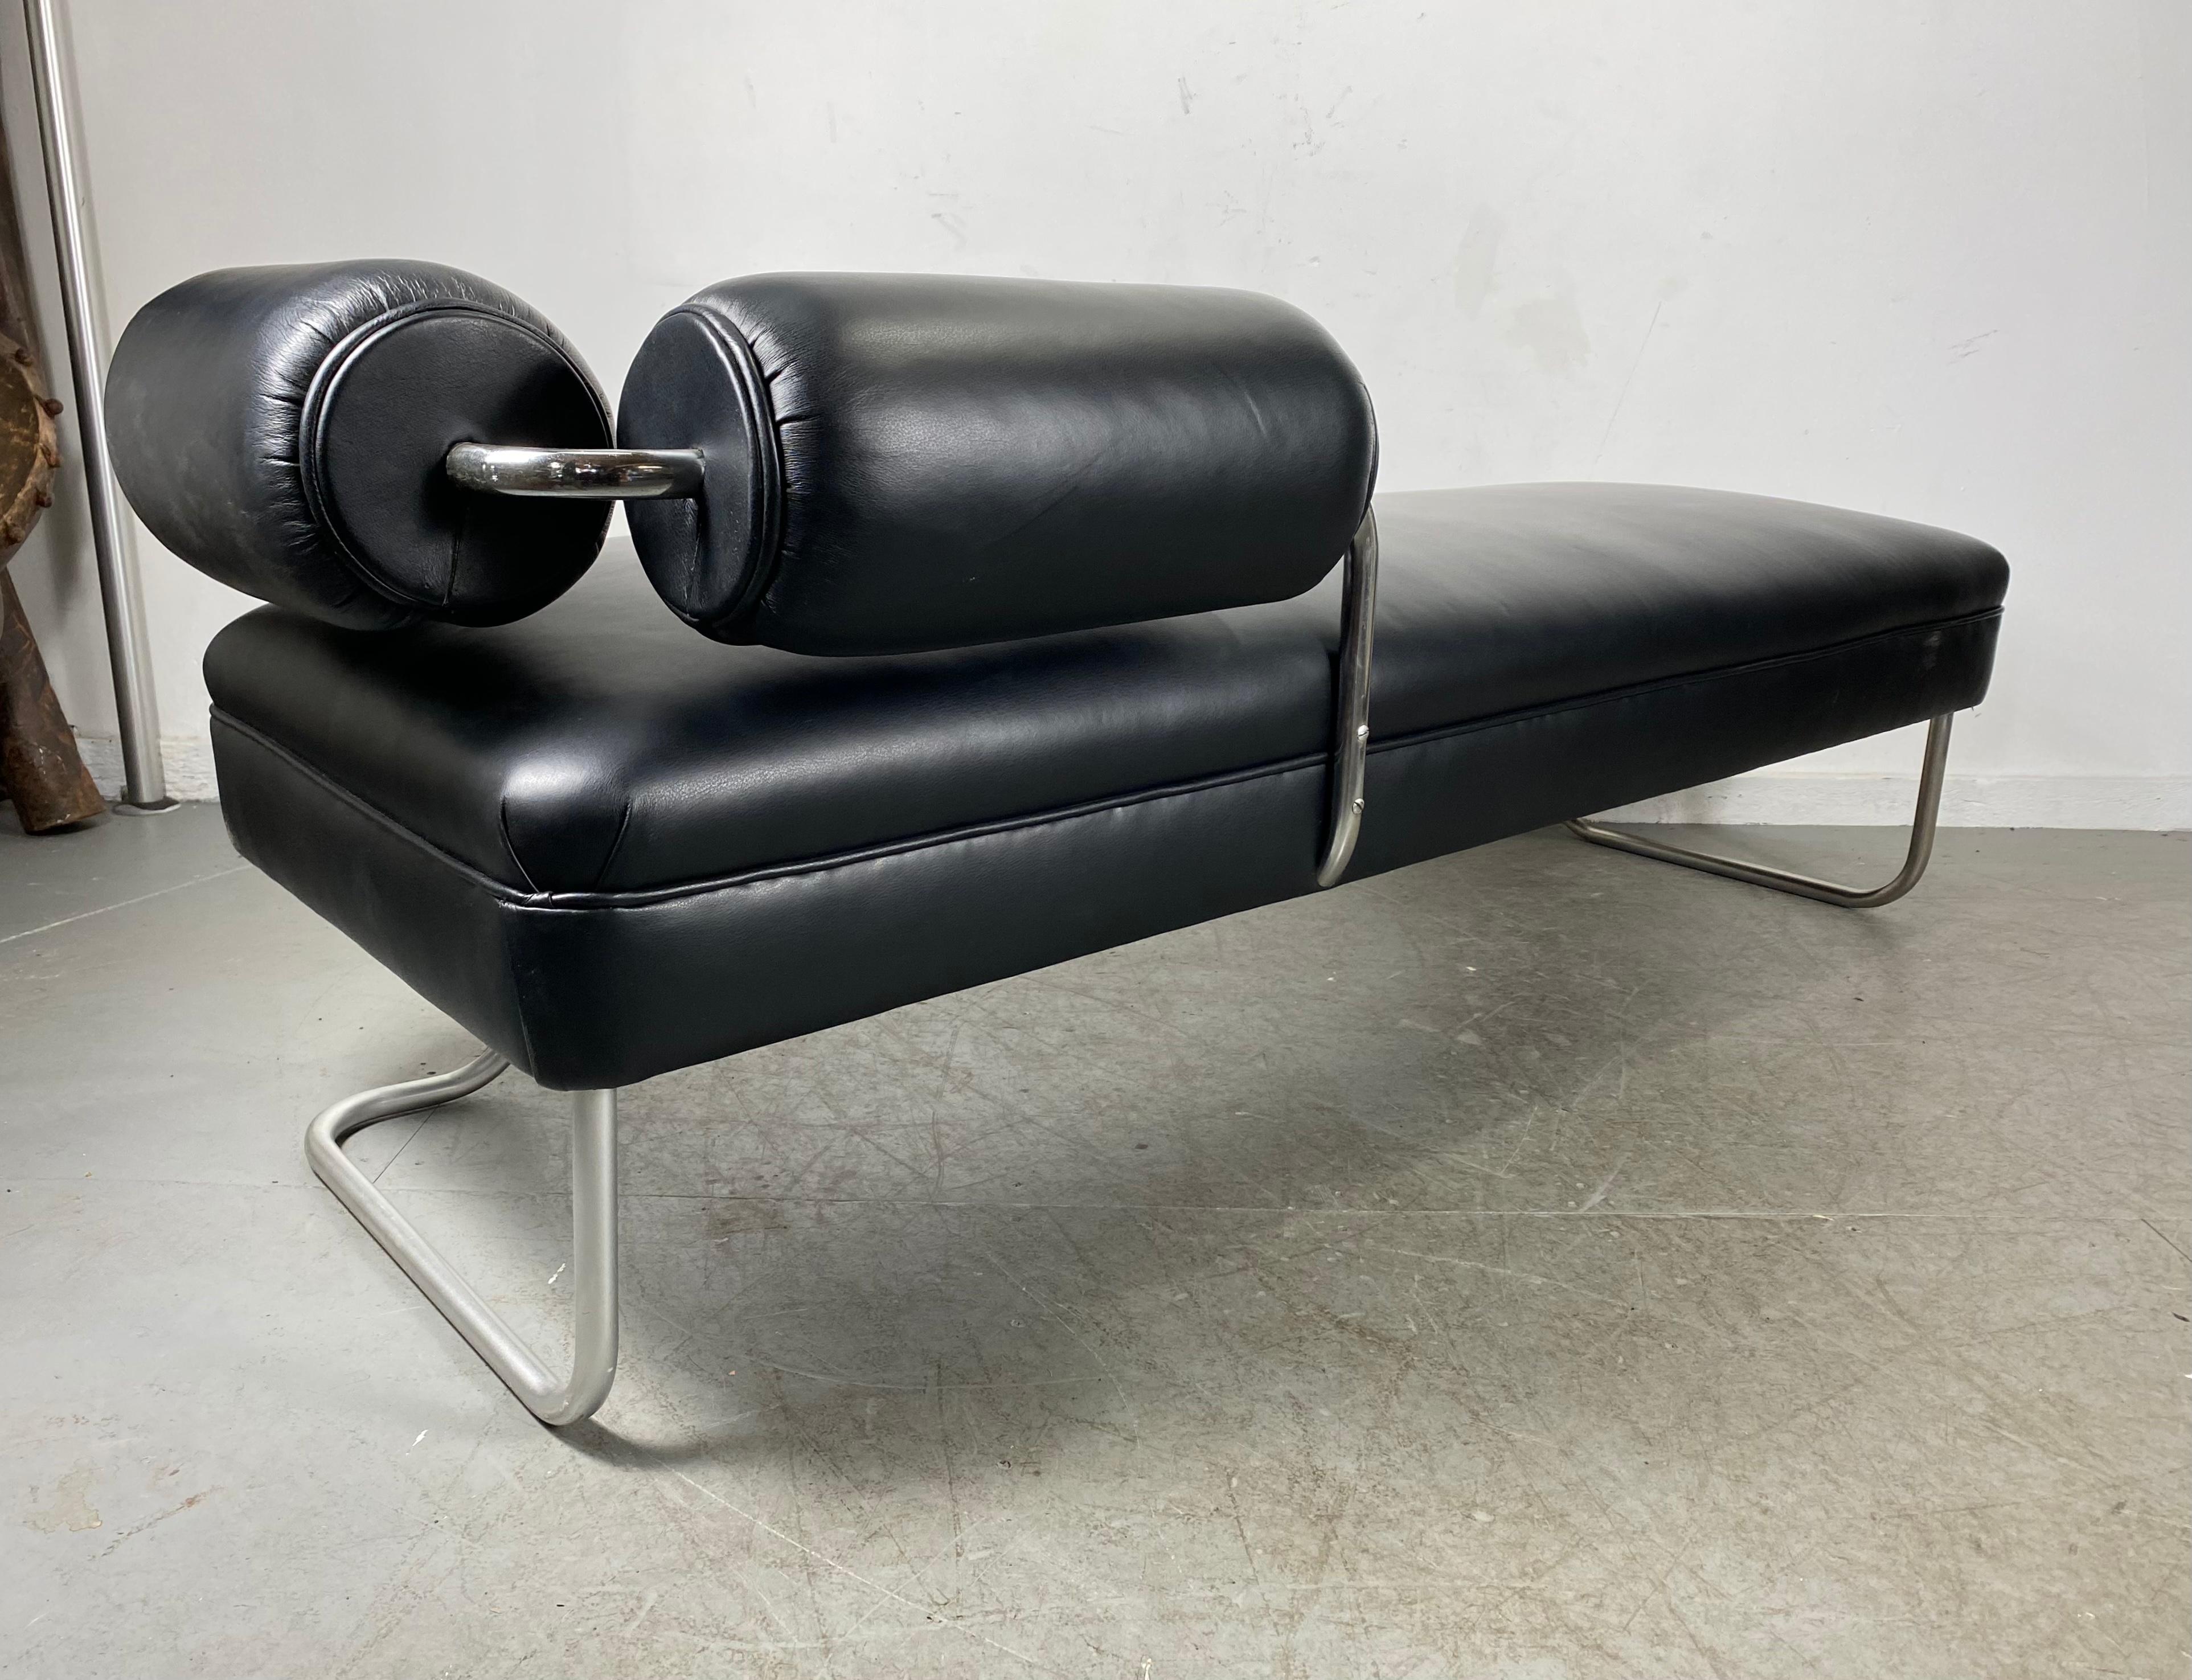 Belgian Unusual Tubular Chrome and Leather Bauhaus Chaise Lounge / Daybed